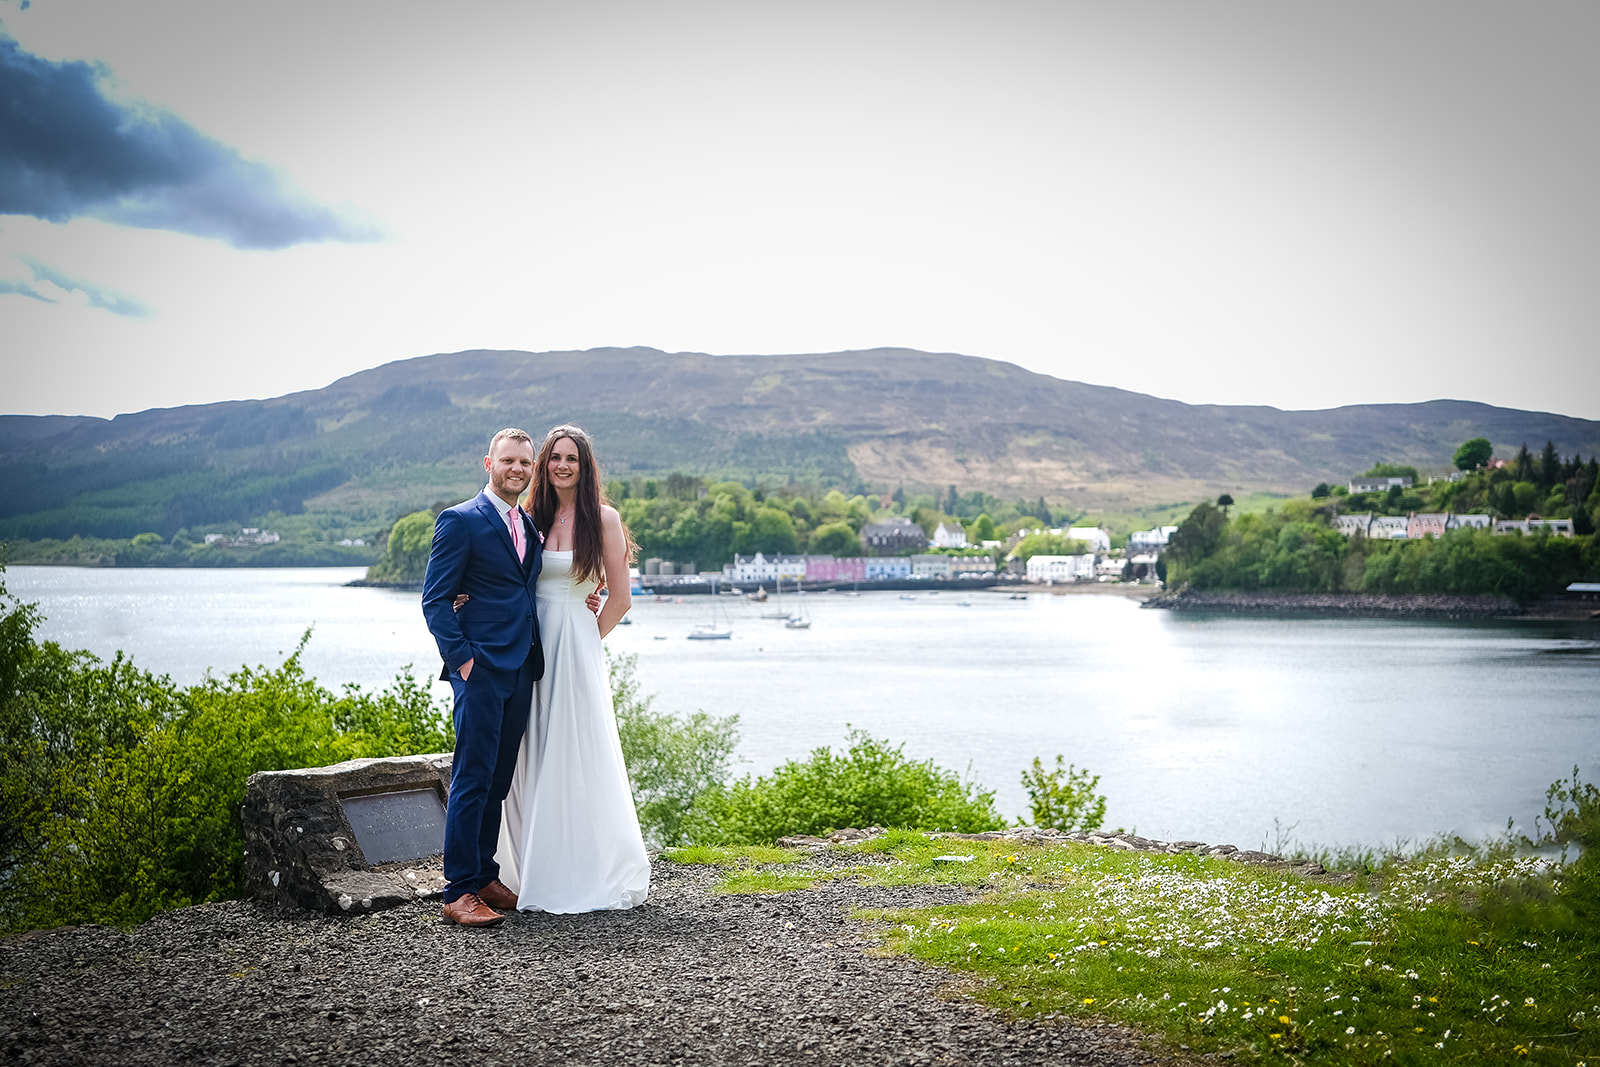 The couple hugging with the Cullen hills and Portree harbour in the background